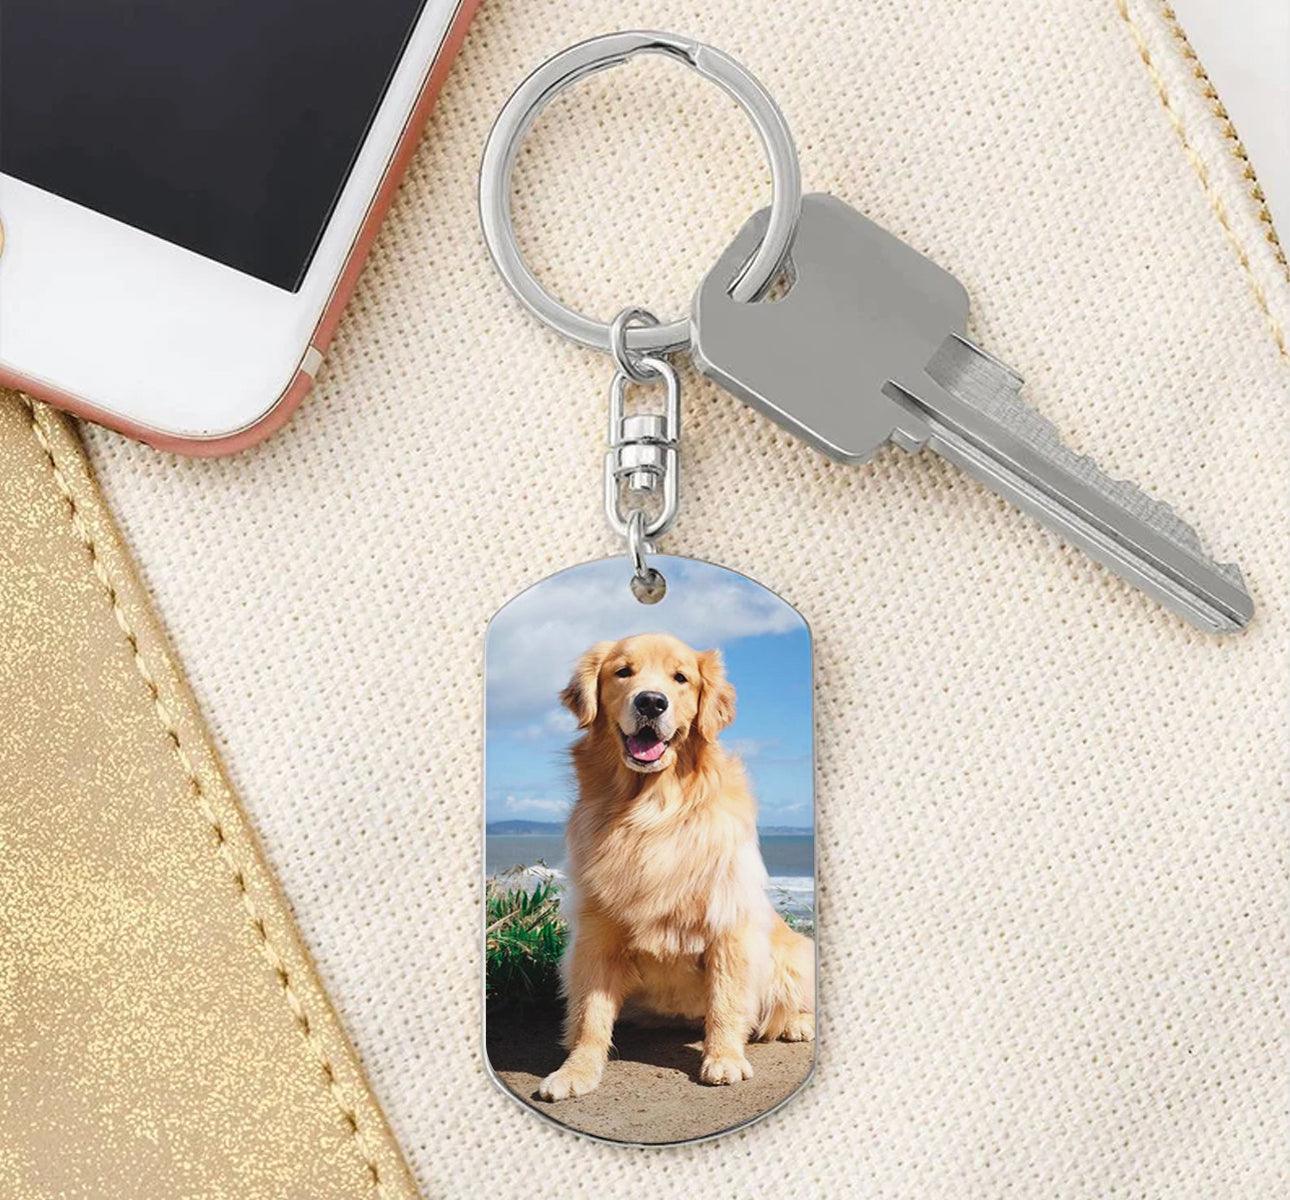 I Loved You Your Whole Life - Dog Memorial Keychain – Memorial